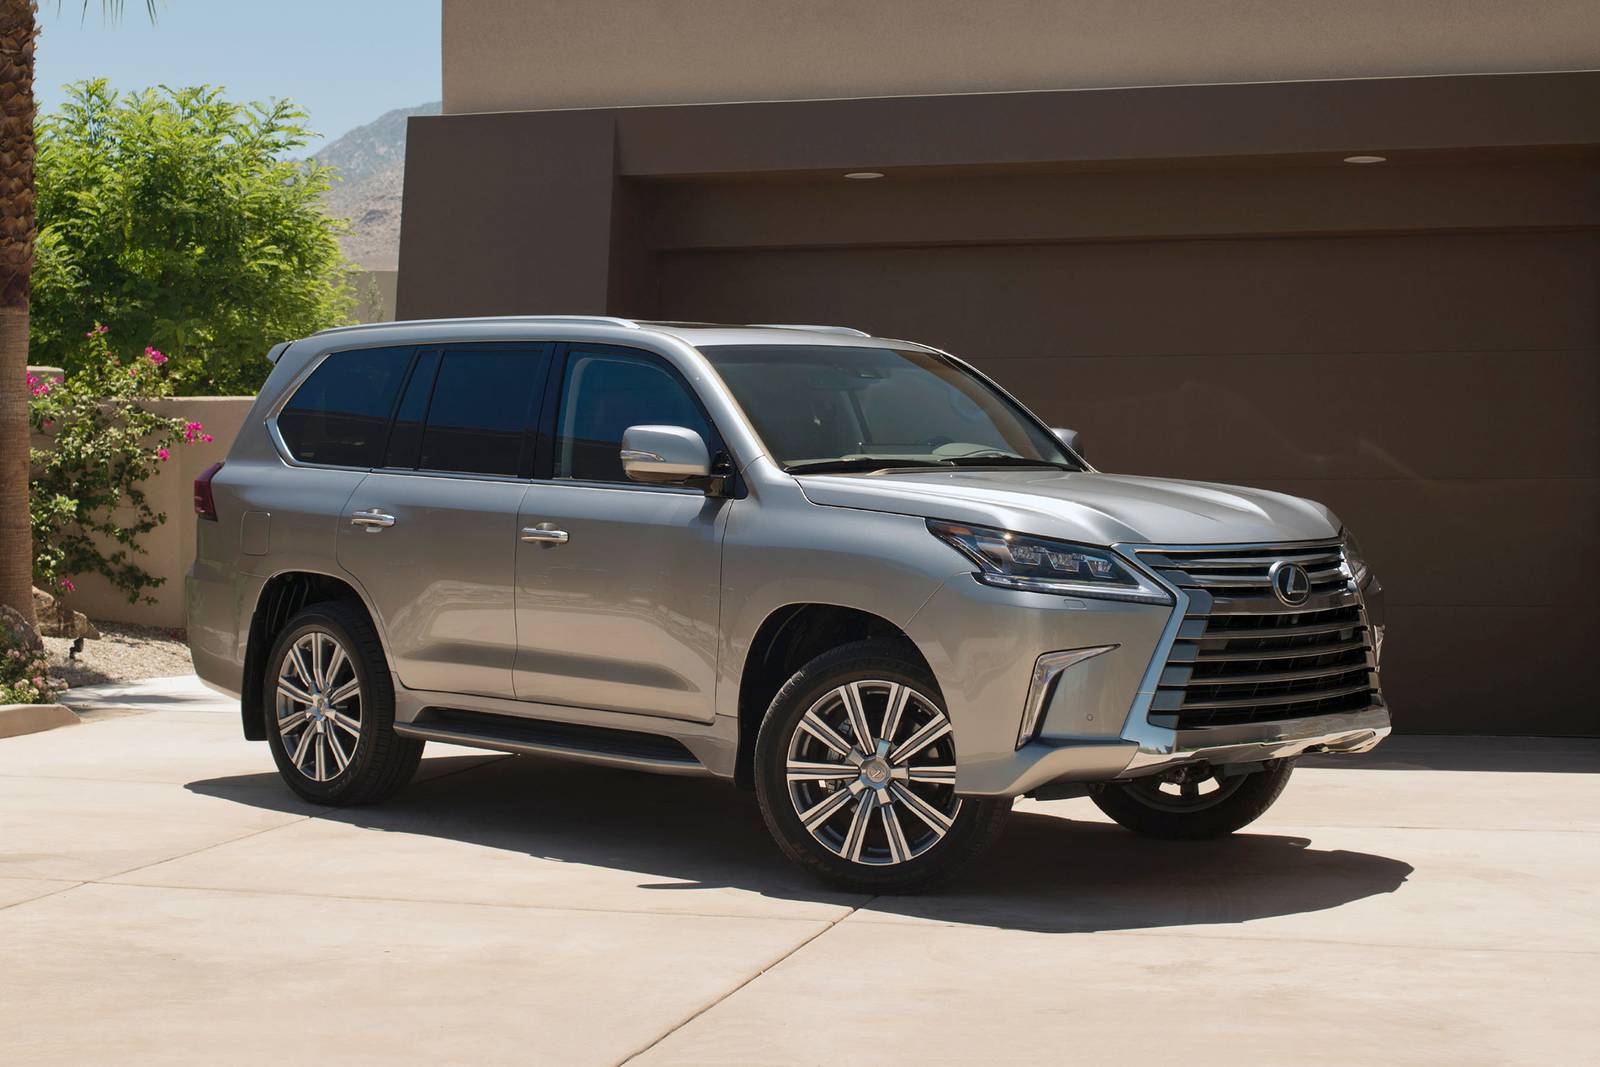 2021 Lexus LX 570 Prices, Reviews, and Pictures | Edmunds